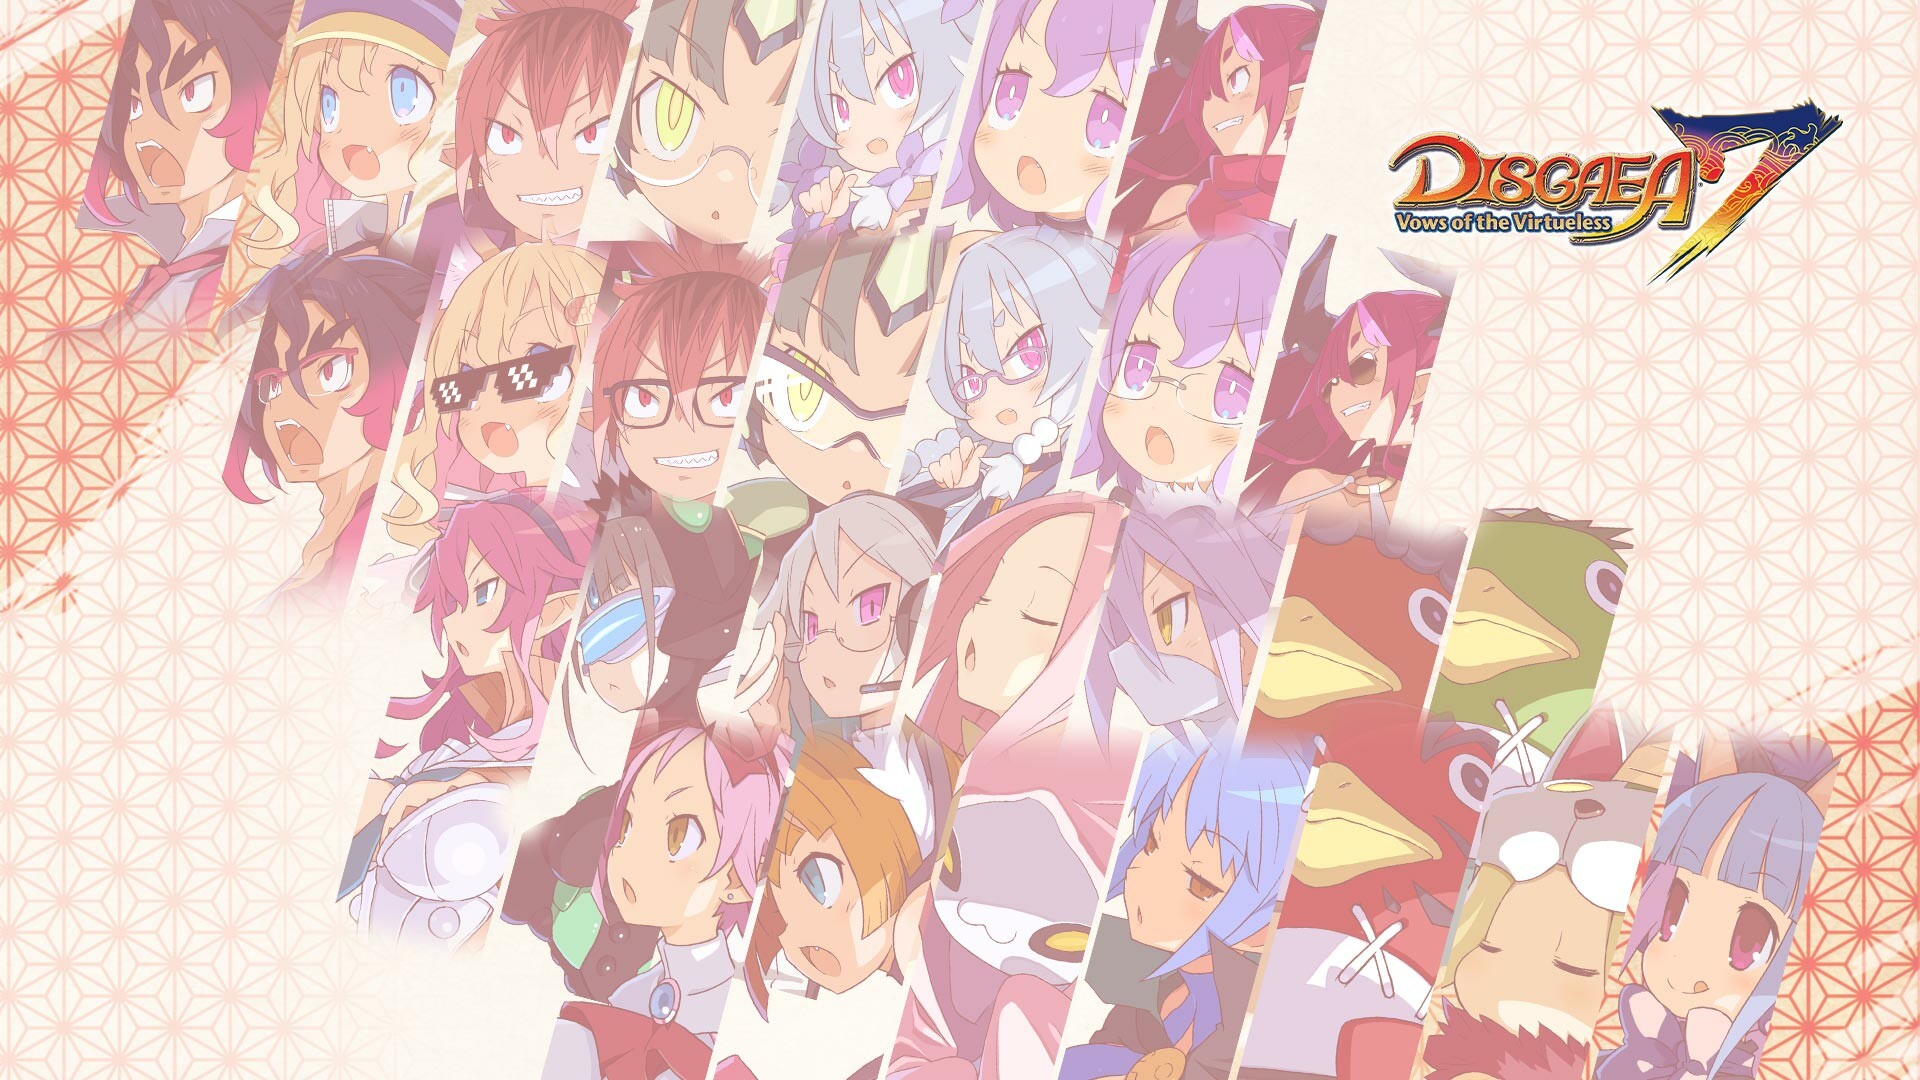 Disgaea 7: Vows of the Virtueless - Cosmetic Set Featured Screenshot #1